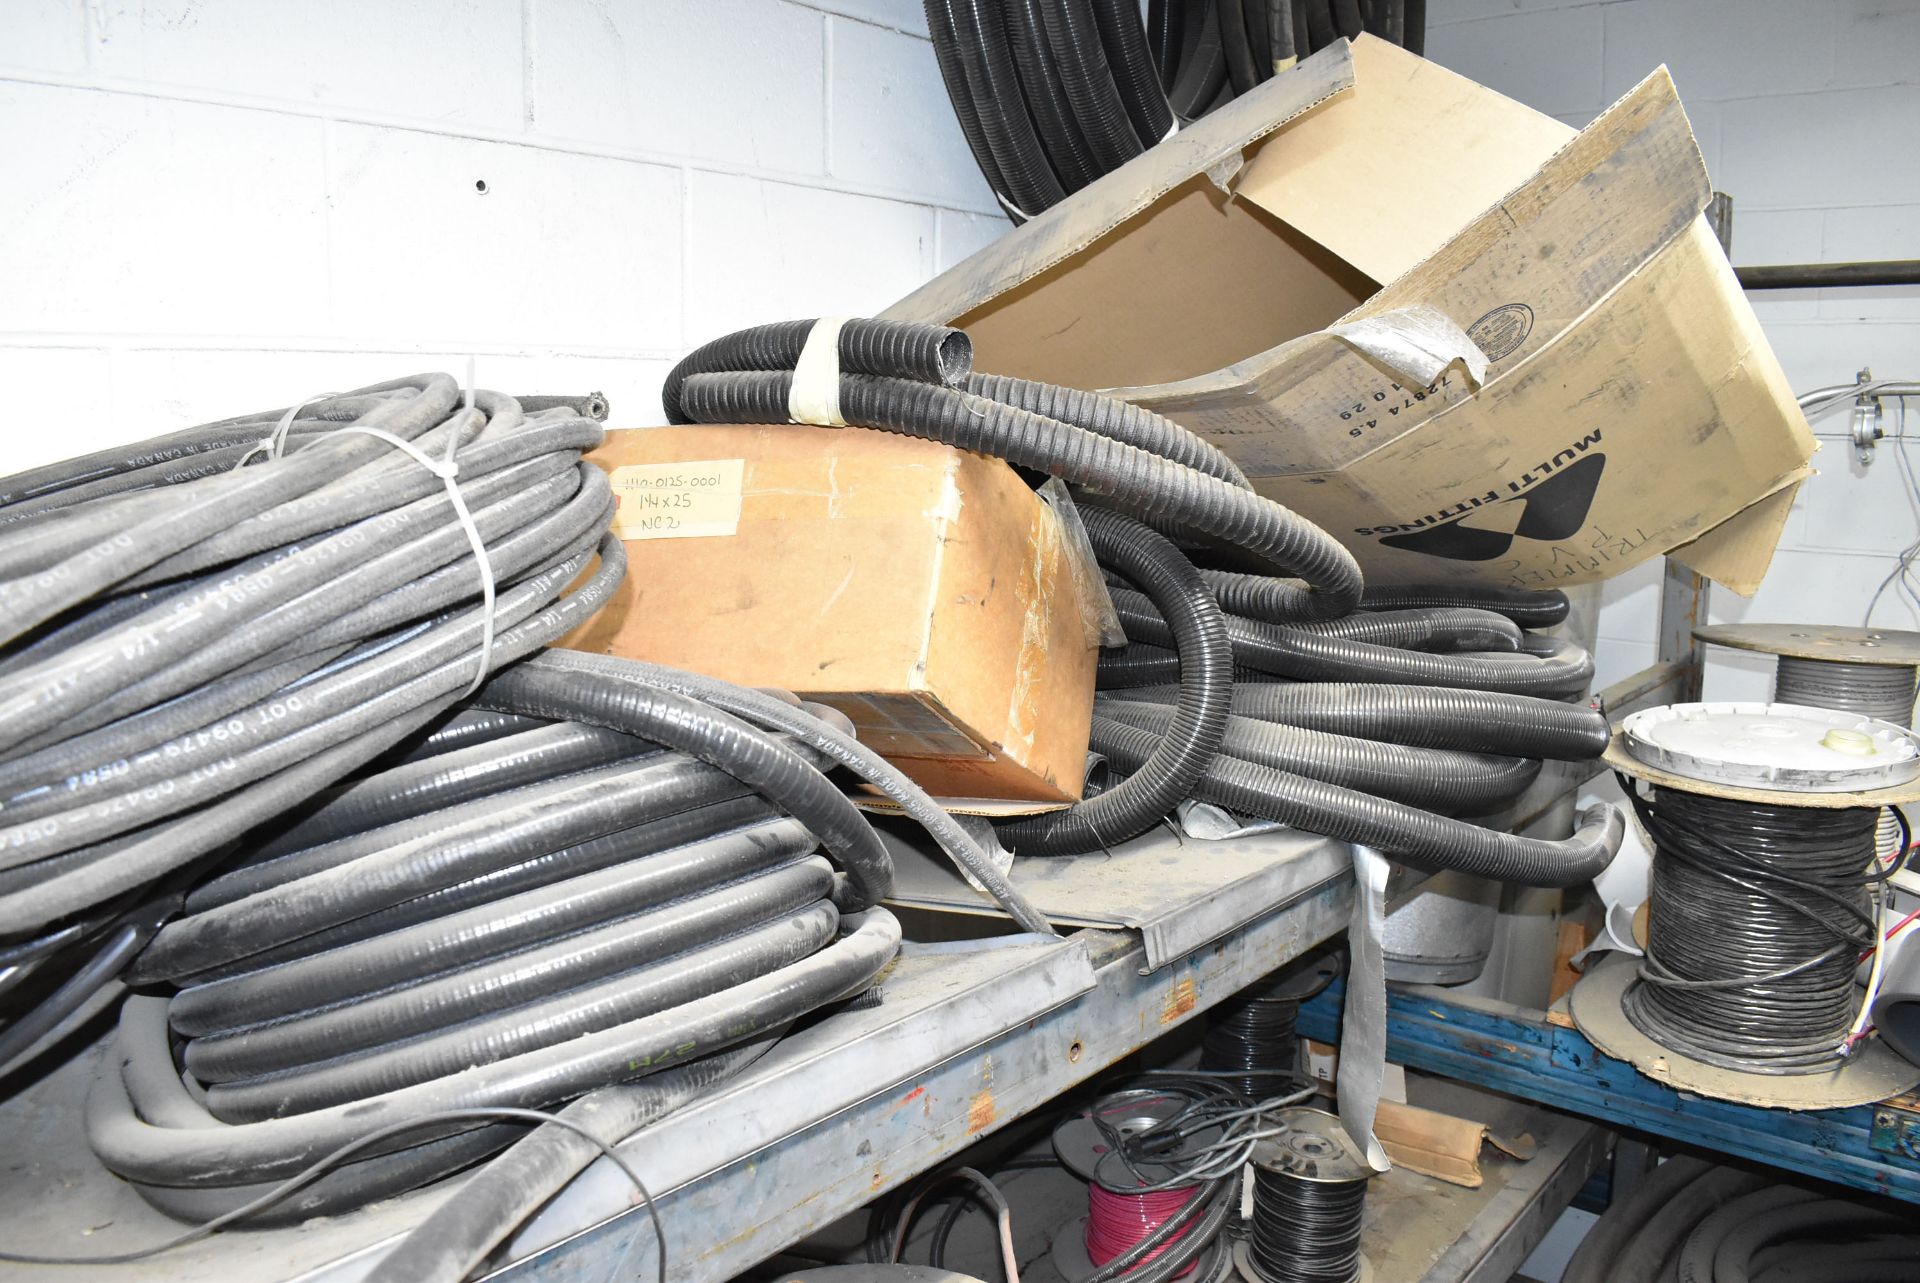 LOT/ (3) SECTIONS OF STEEL RACK WITH CONTENTS - INCLUDING ELECTRIC MOTORS, HYDRAULIC HOSES, ELECTRIC - Image 17 of 18